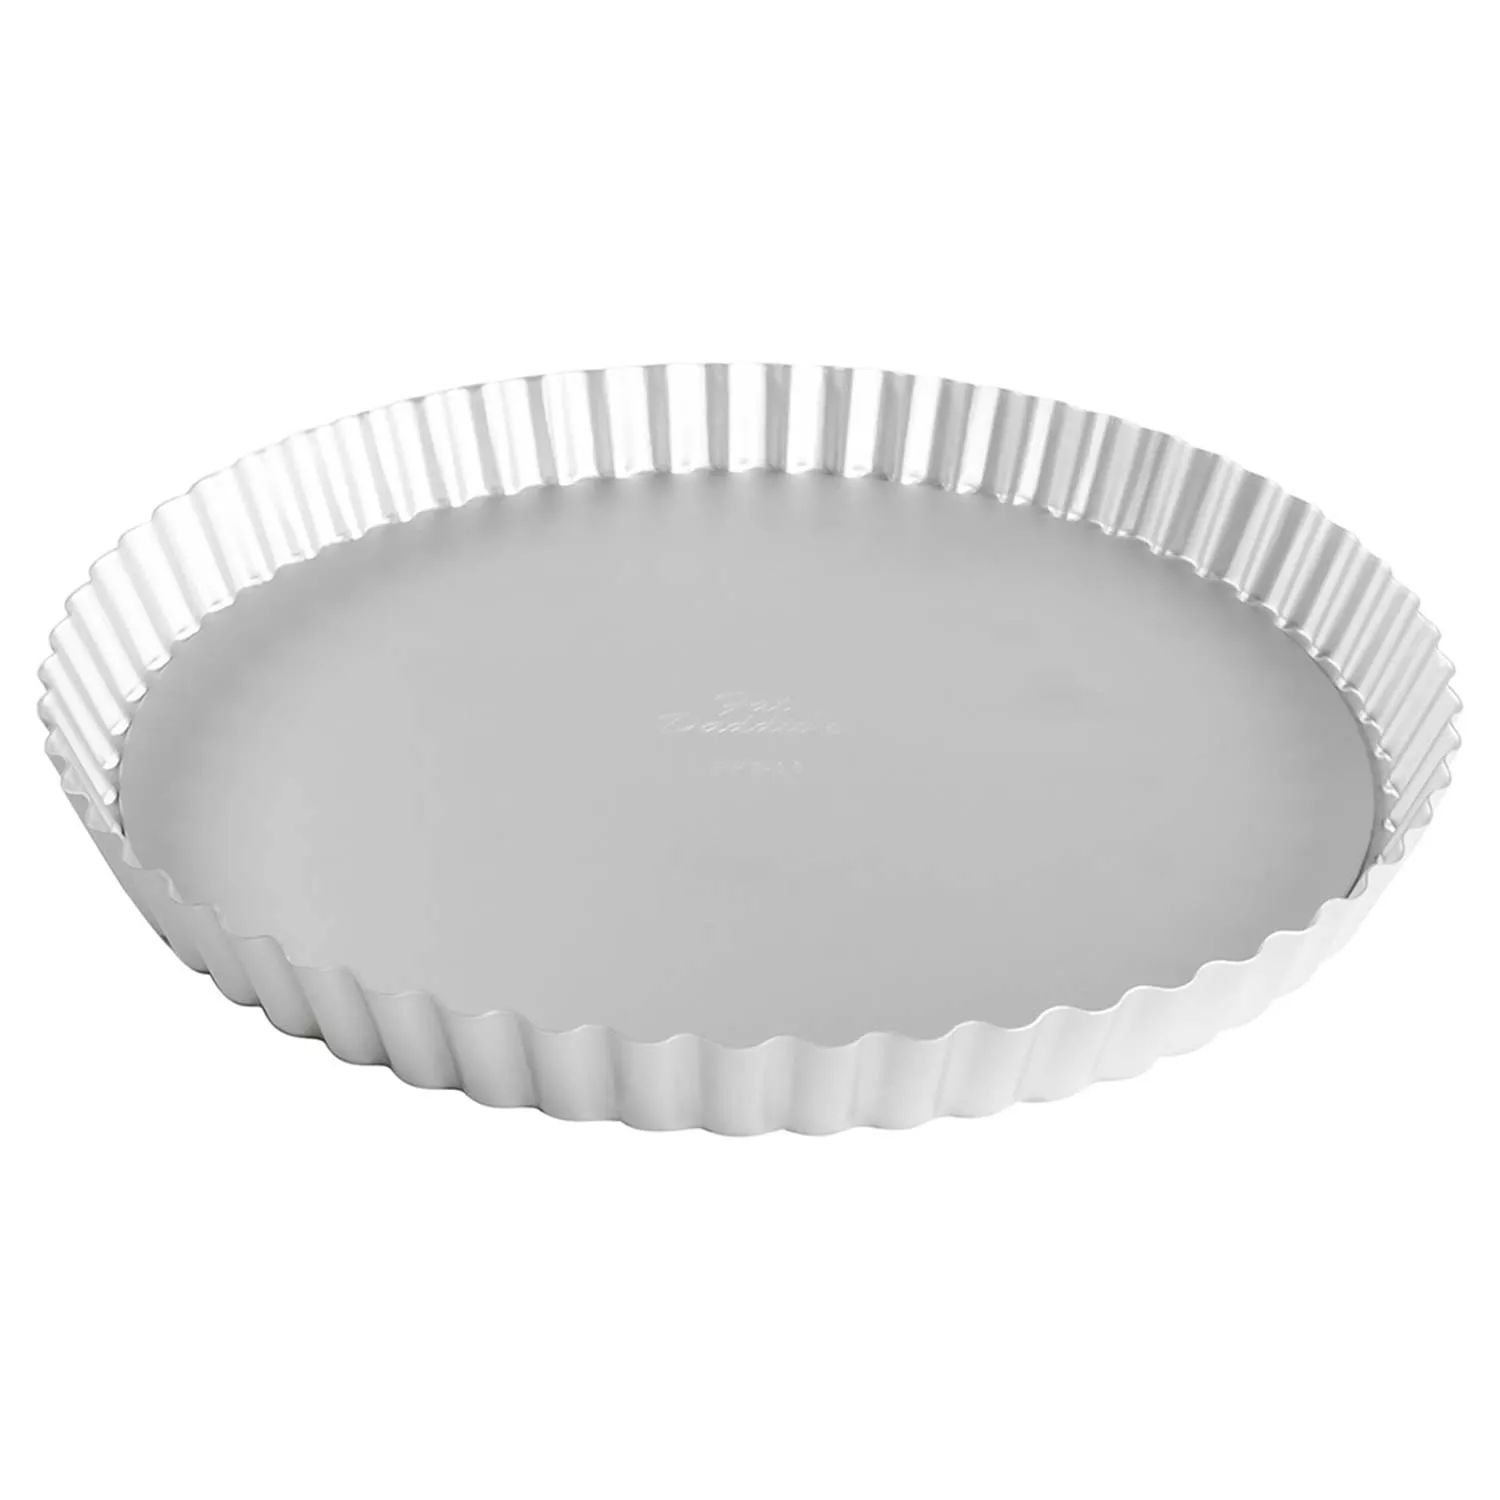 Fat Daddio's Anodized Aluminum Round Cake Pan 14-inch x 4-Inch